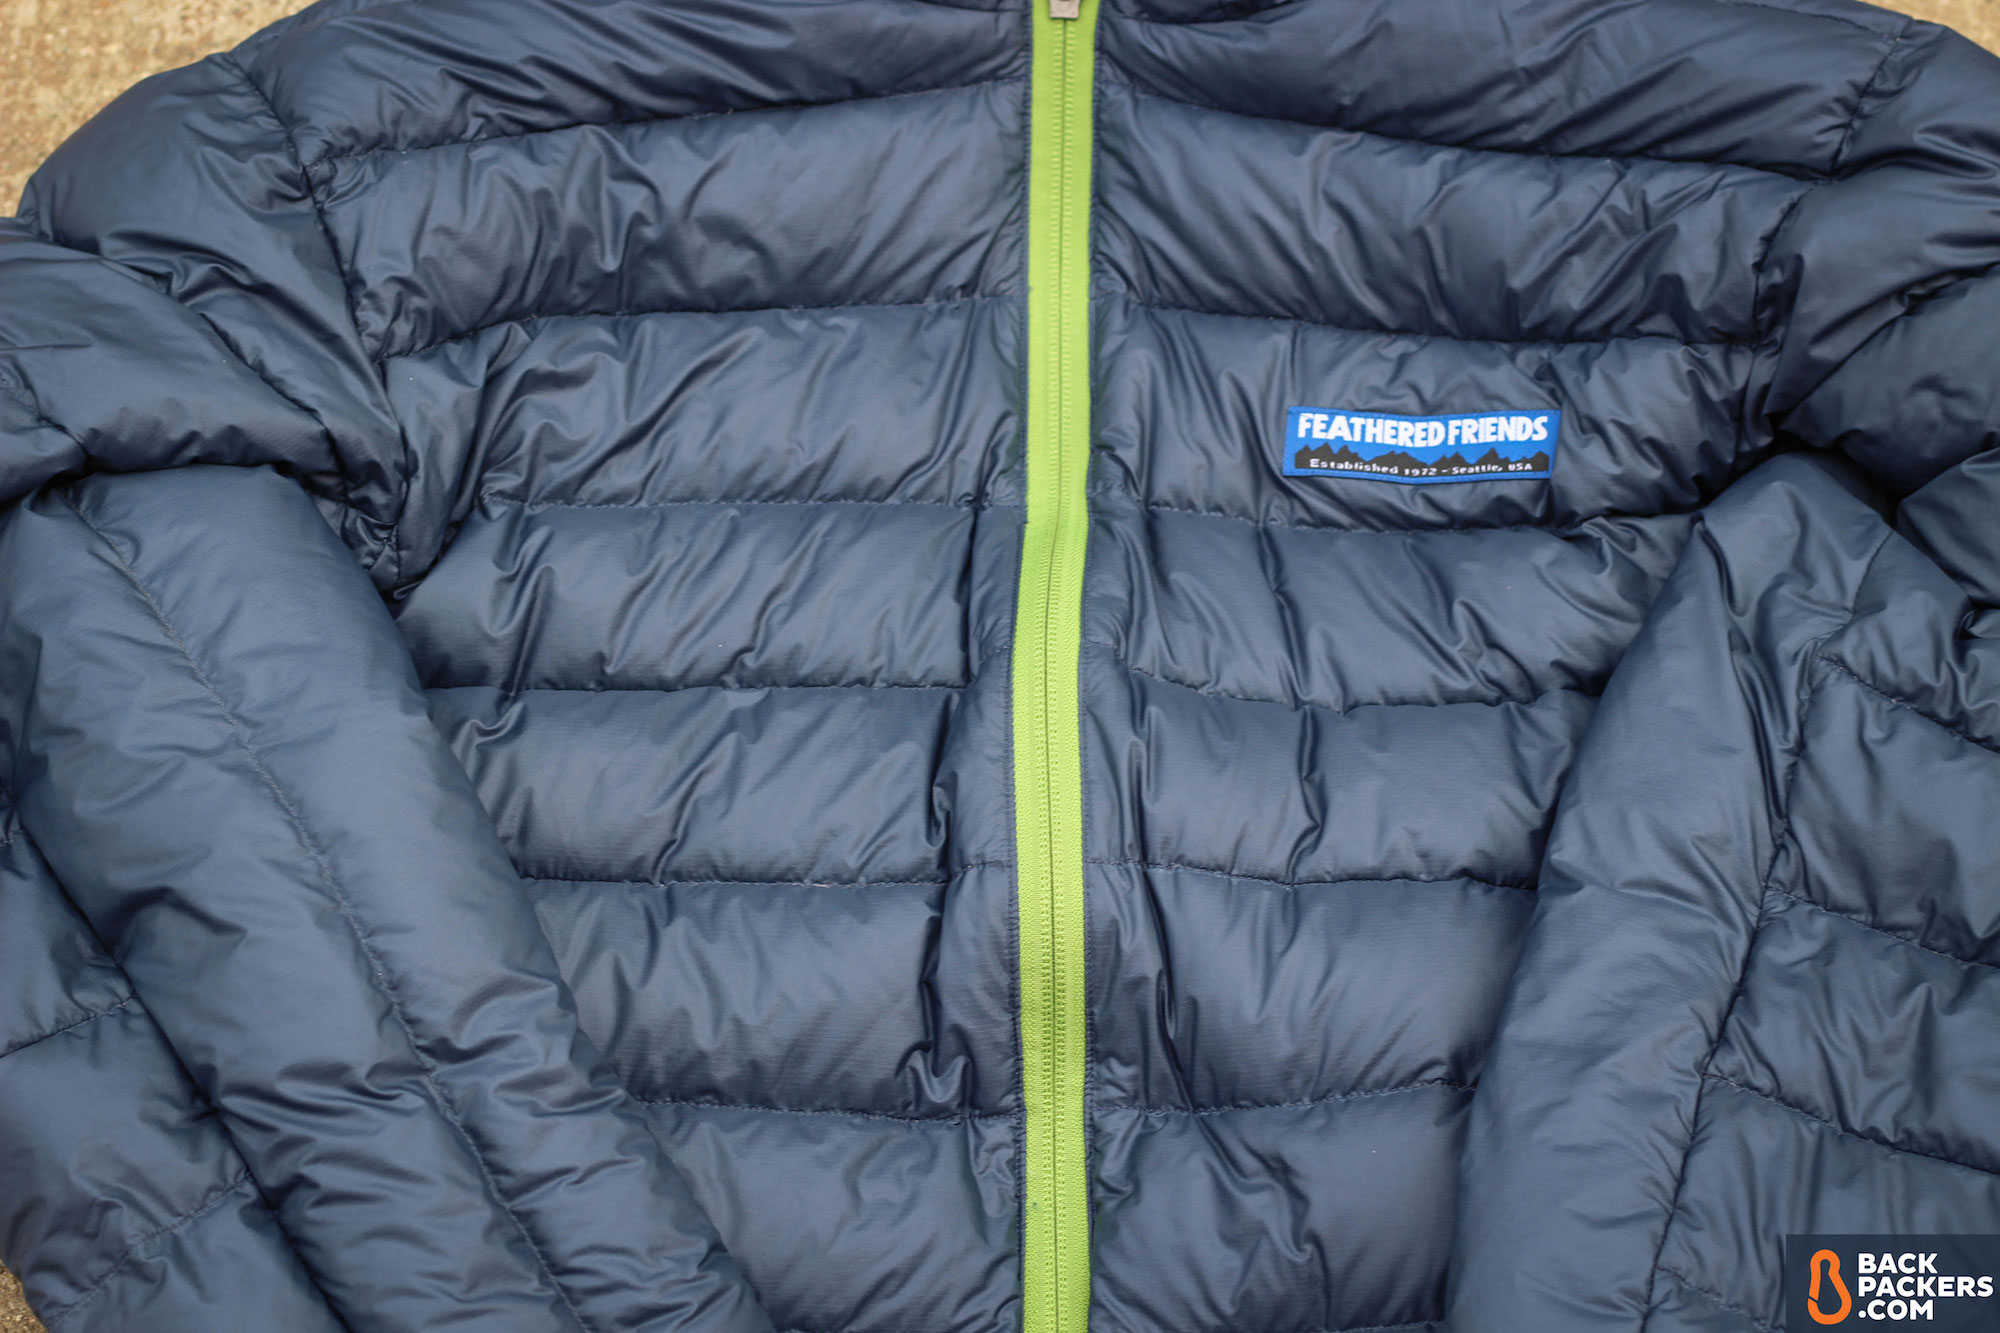 Feathered Friends Eos Down Jacket Review | Backpackers.com